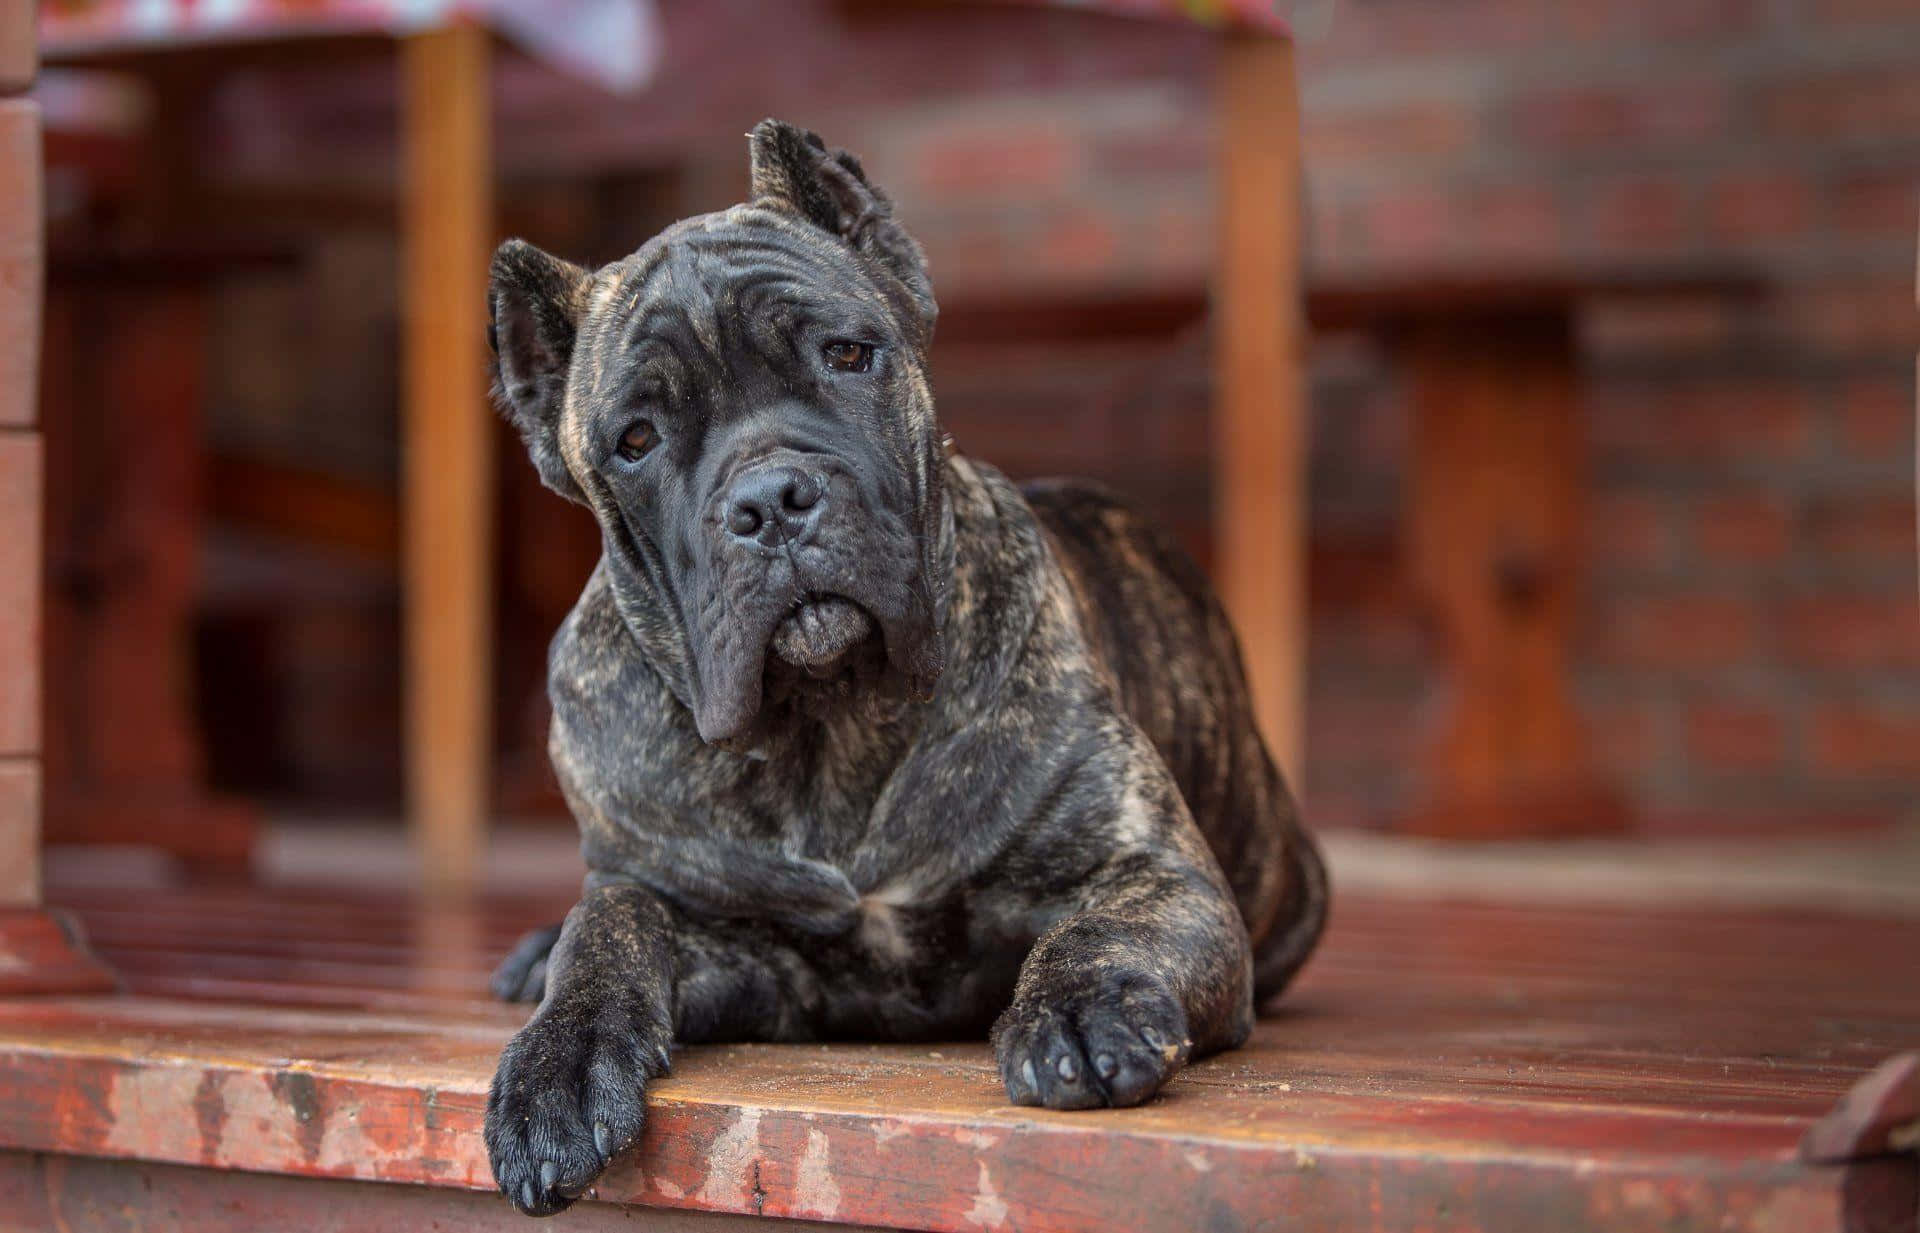 No intimidation needed - show your love for the loyal and affectionate Cane Corso.